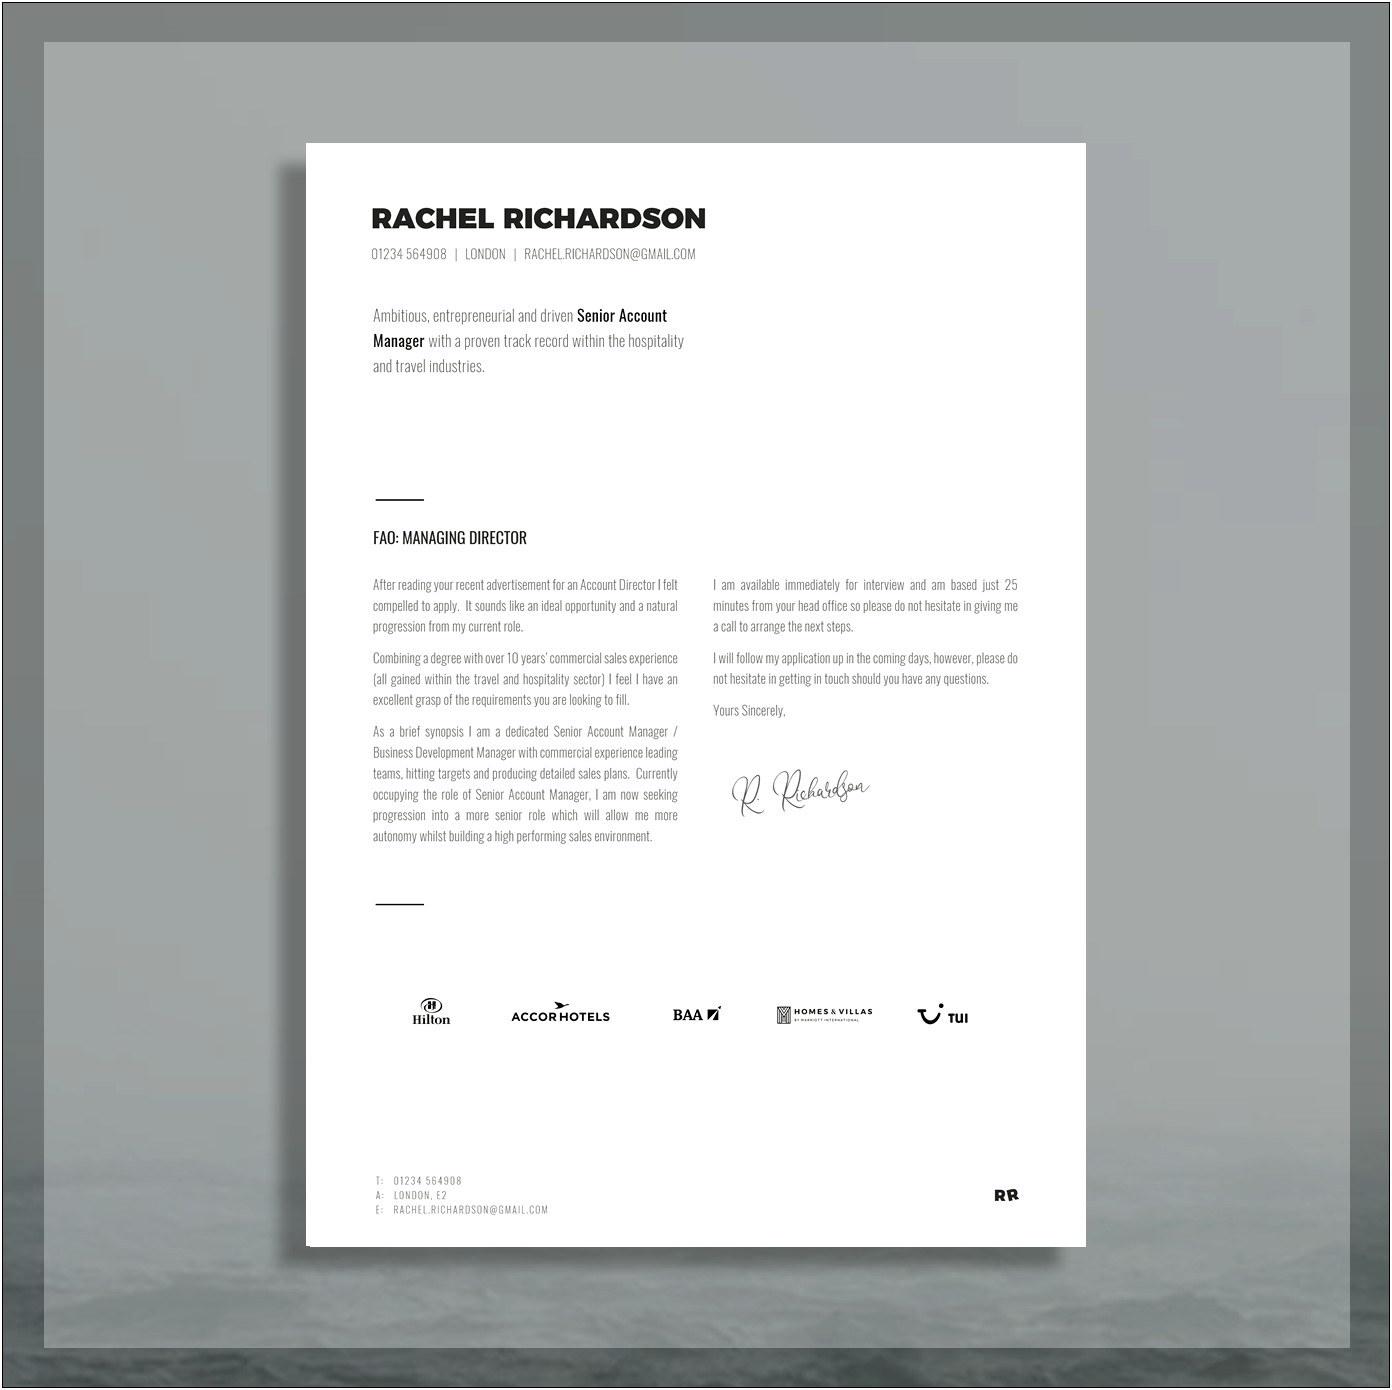 Cover Letter Resume And Reference Templates